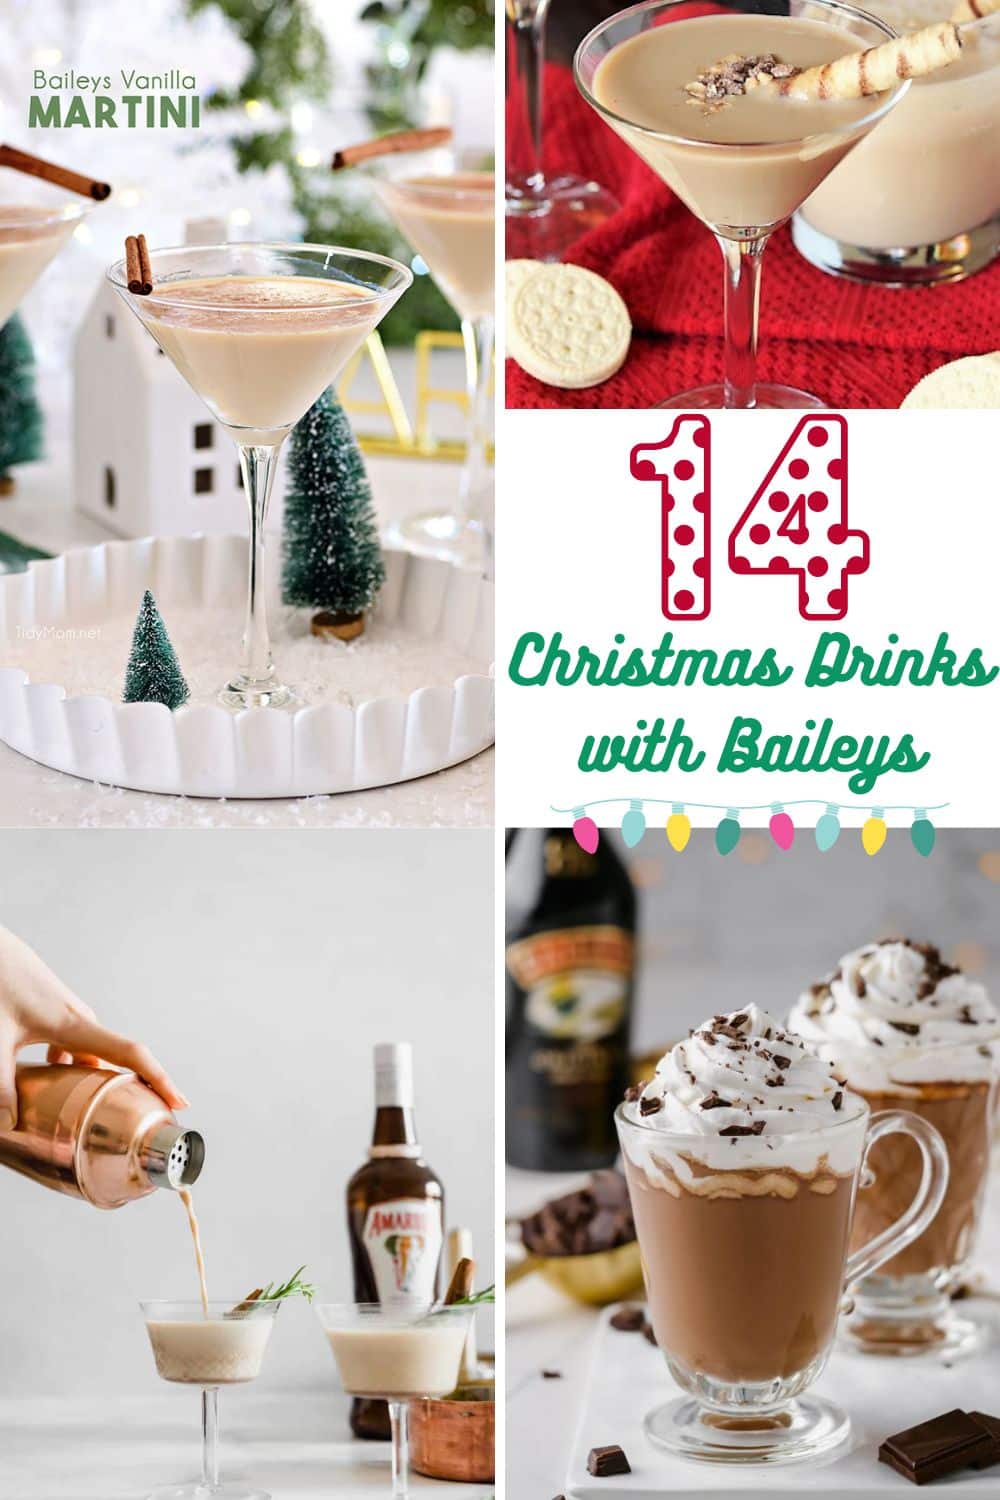 Christmas Drinks with Baileys (14 Recipes to try!)